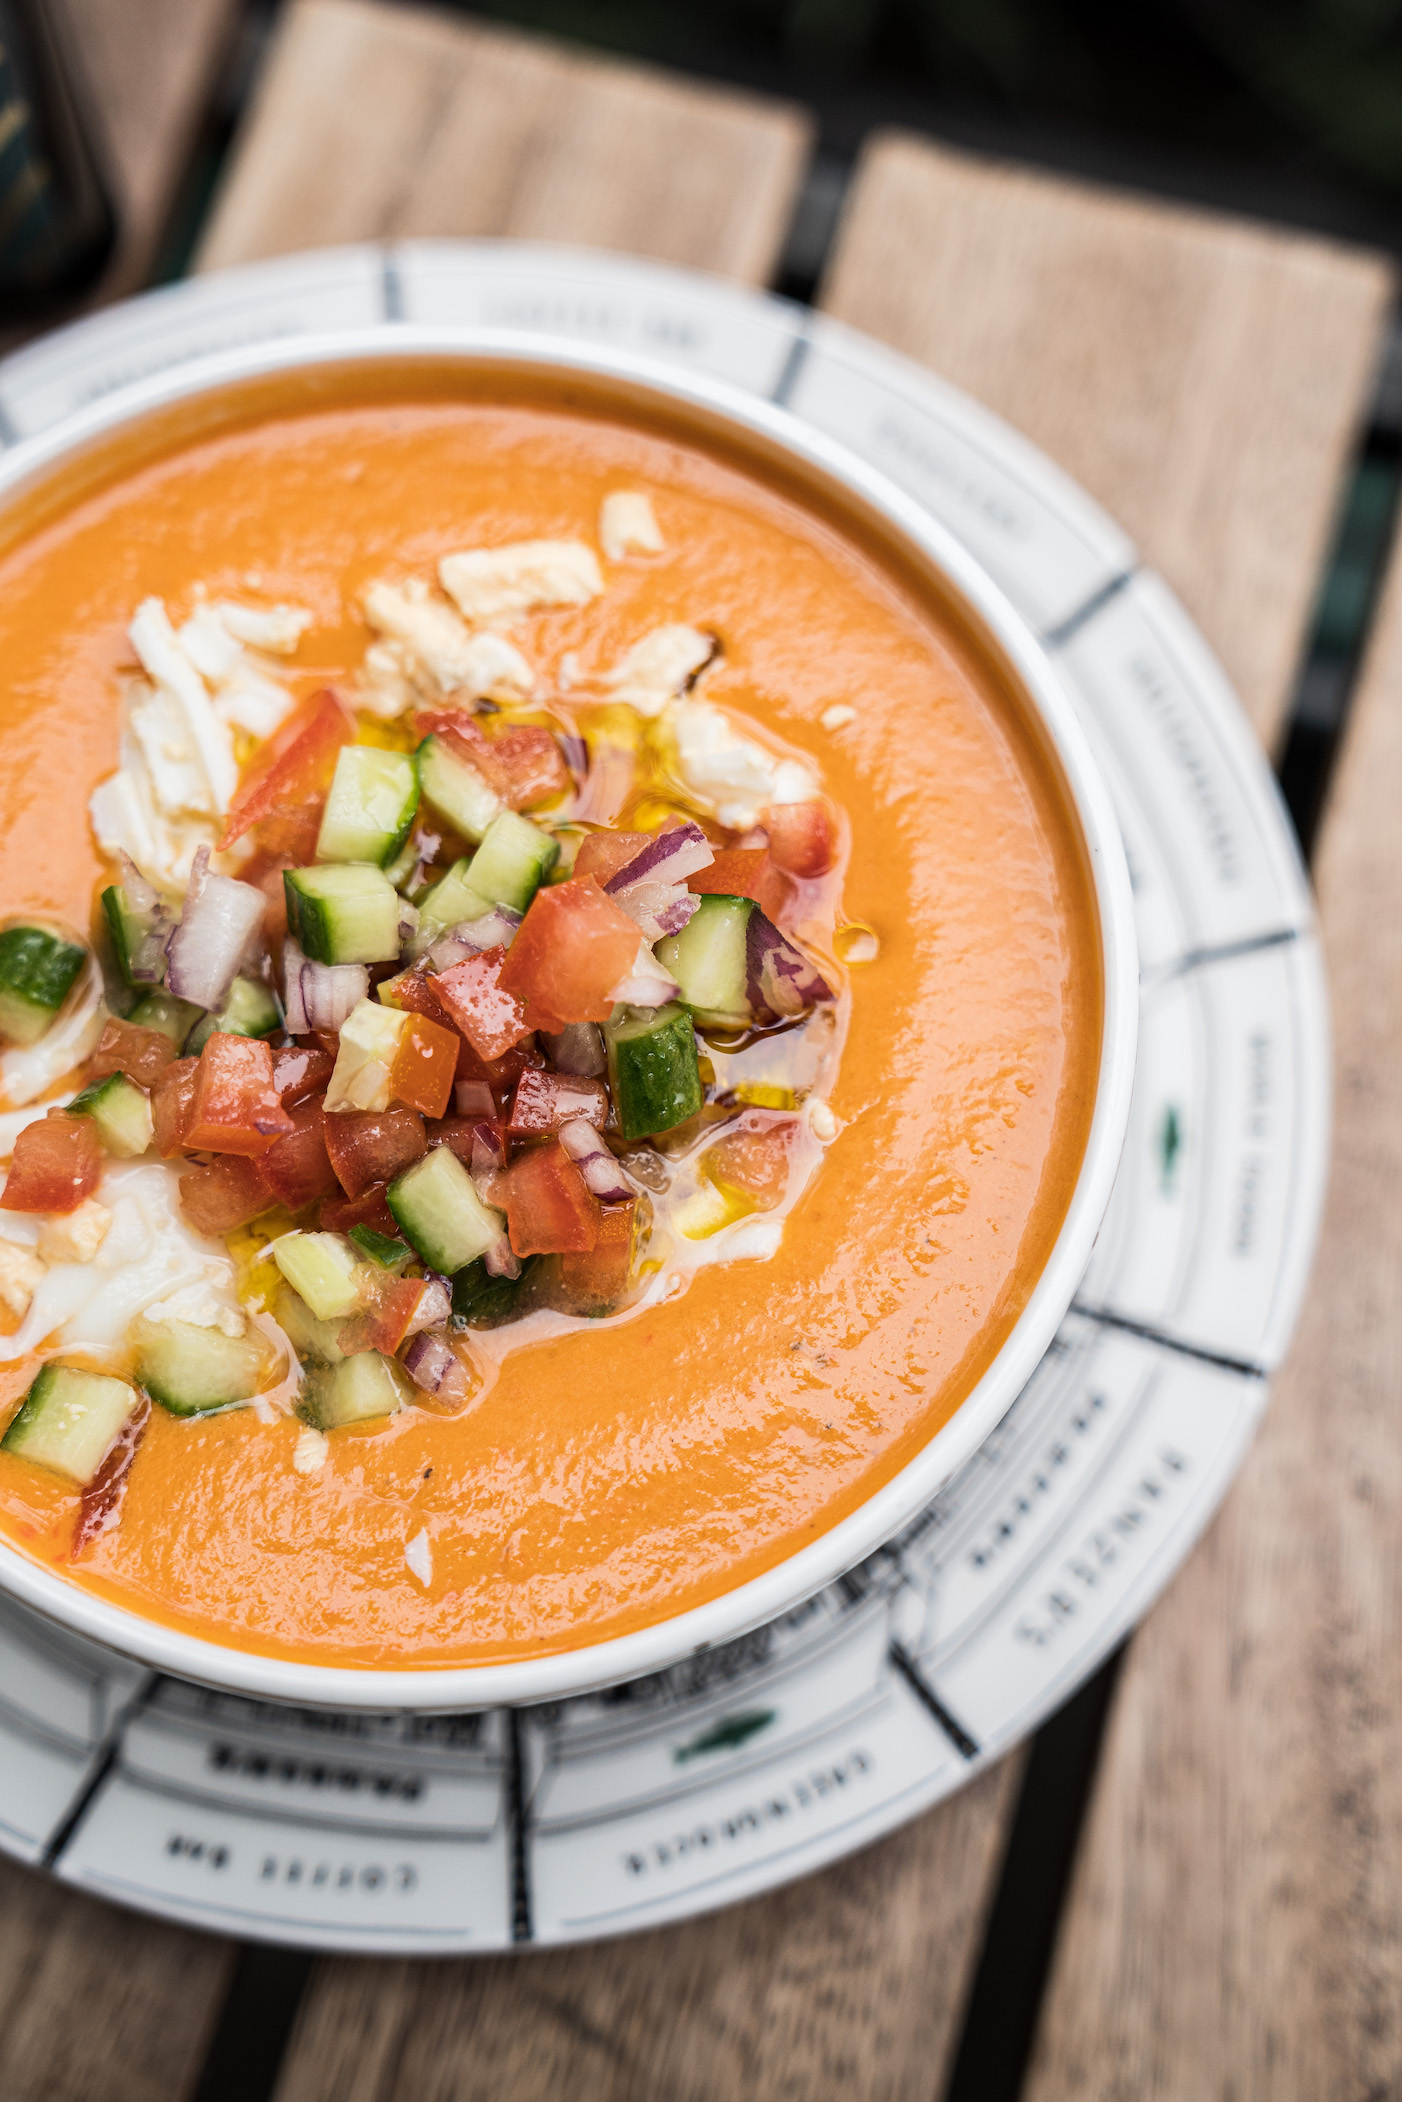 A bowl of homemade Panzer's gazpacho soup, loaded with fresh toppings